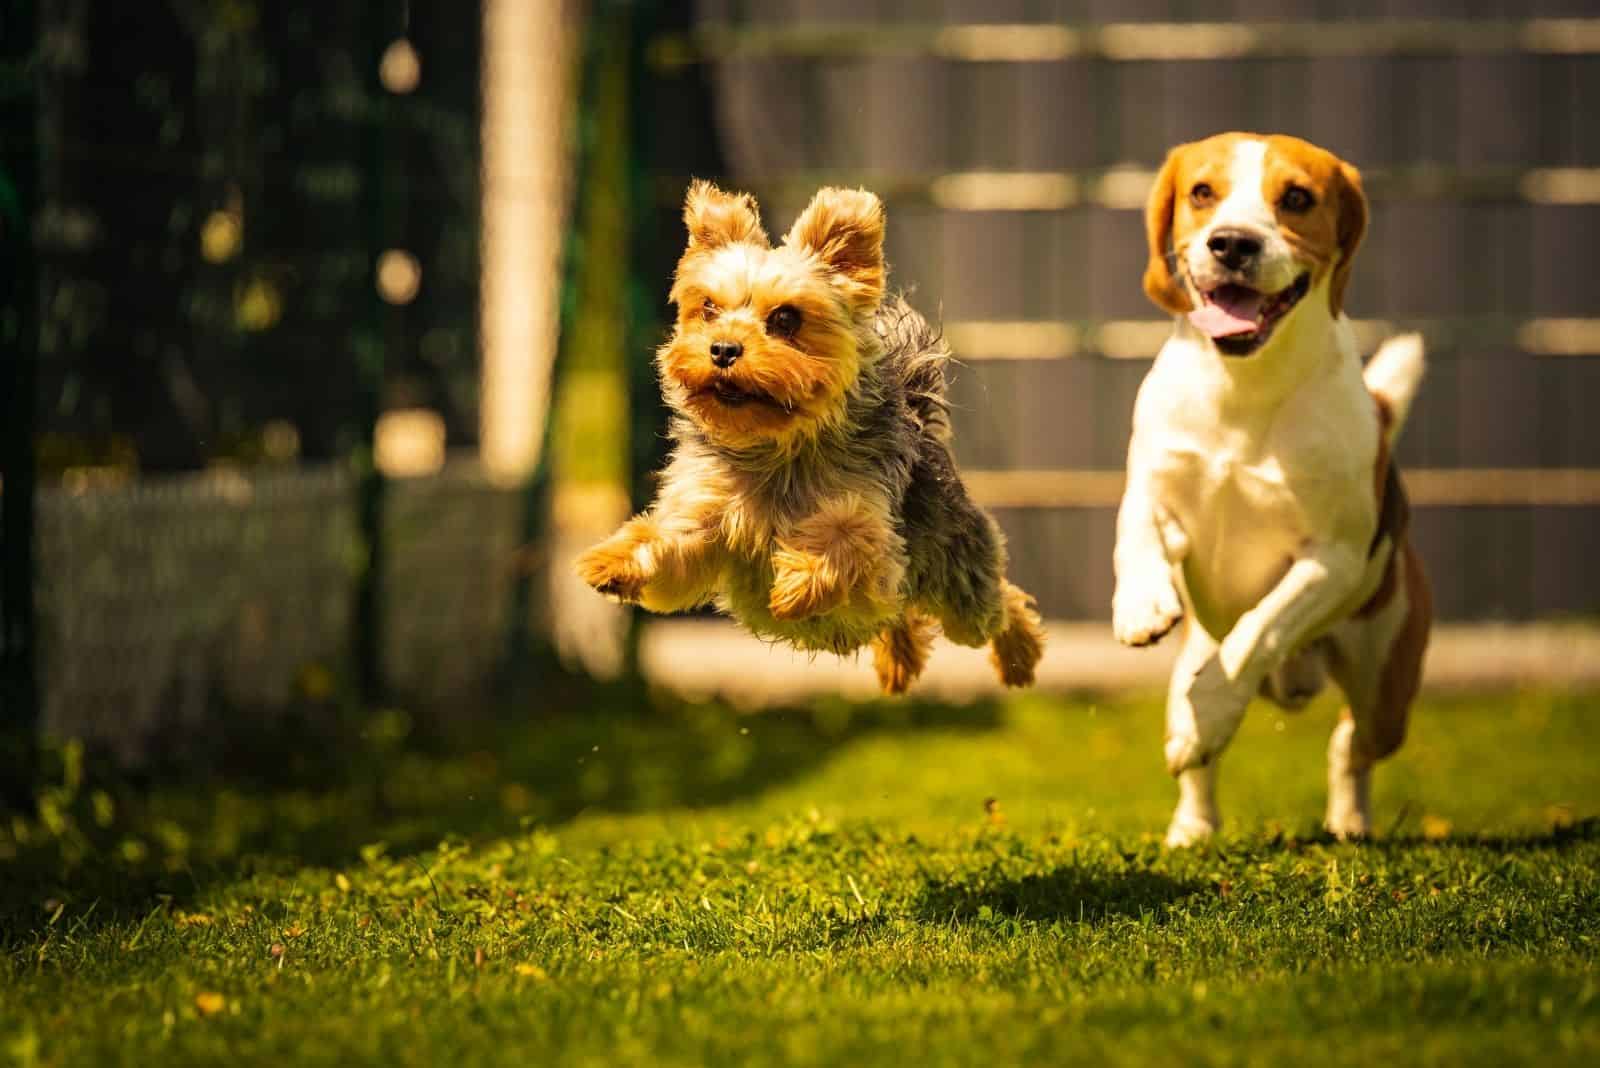 yorkshire terrier dog and beagle chasing each other